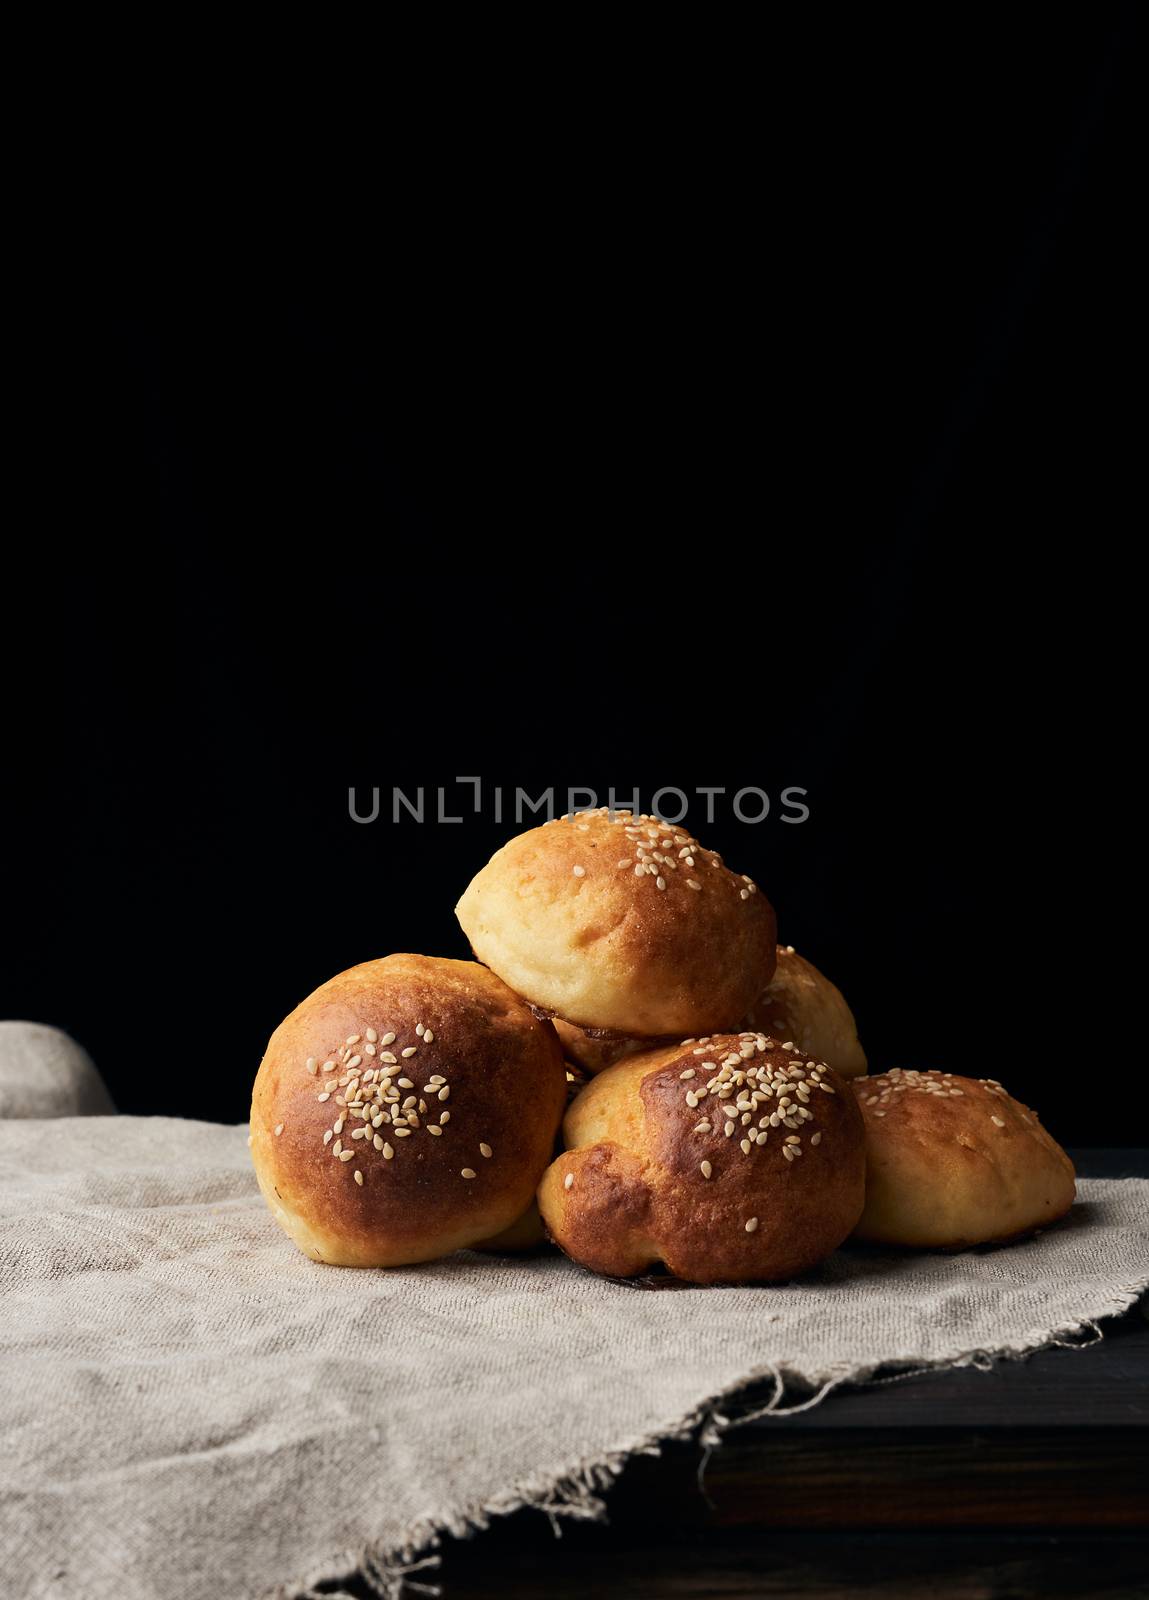 baked round bun with sesame seeds, black background, home baking, copy spave